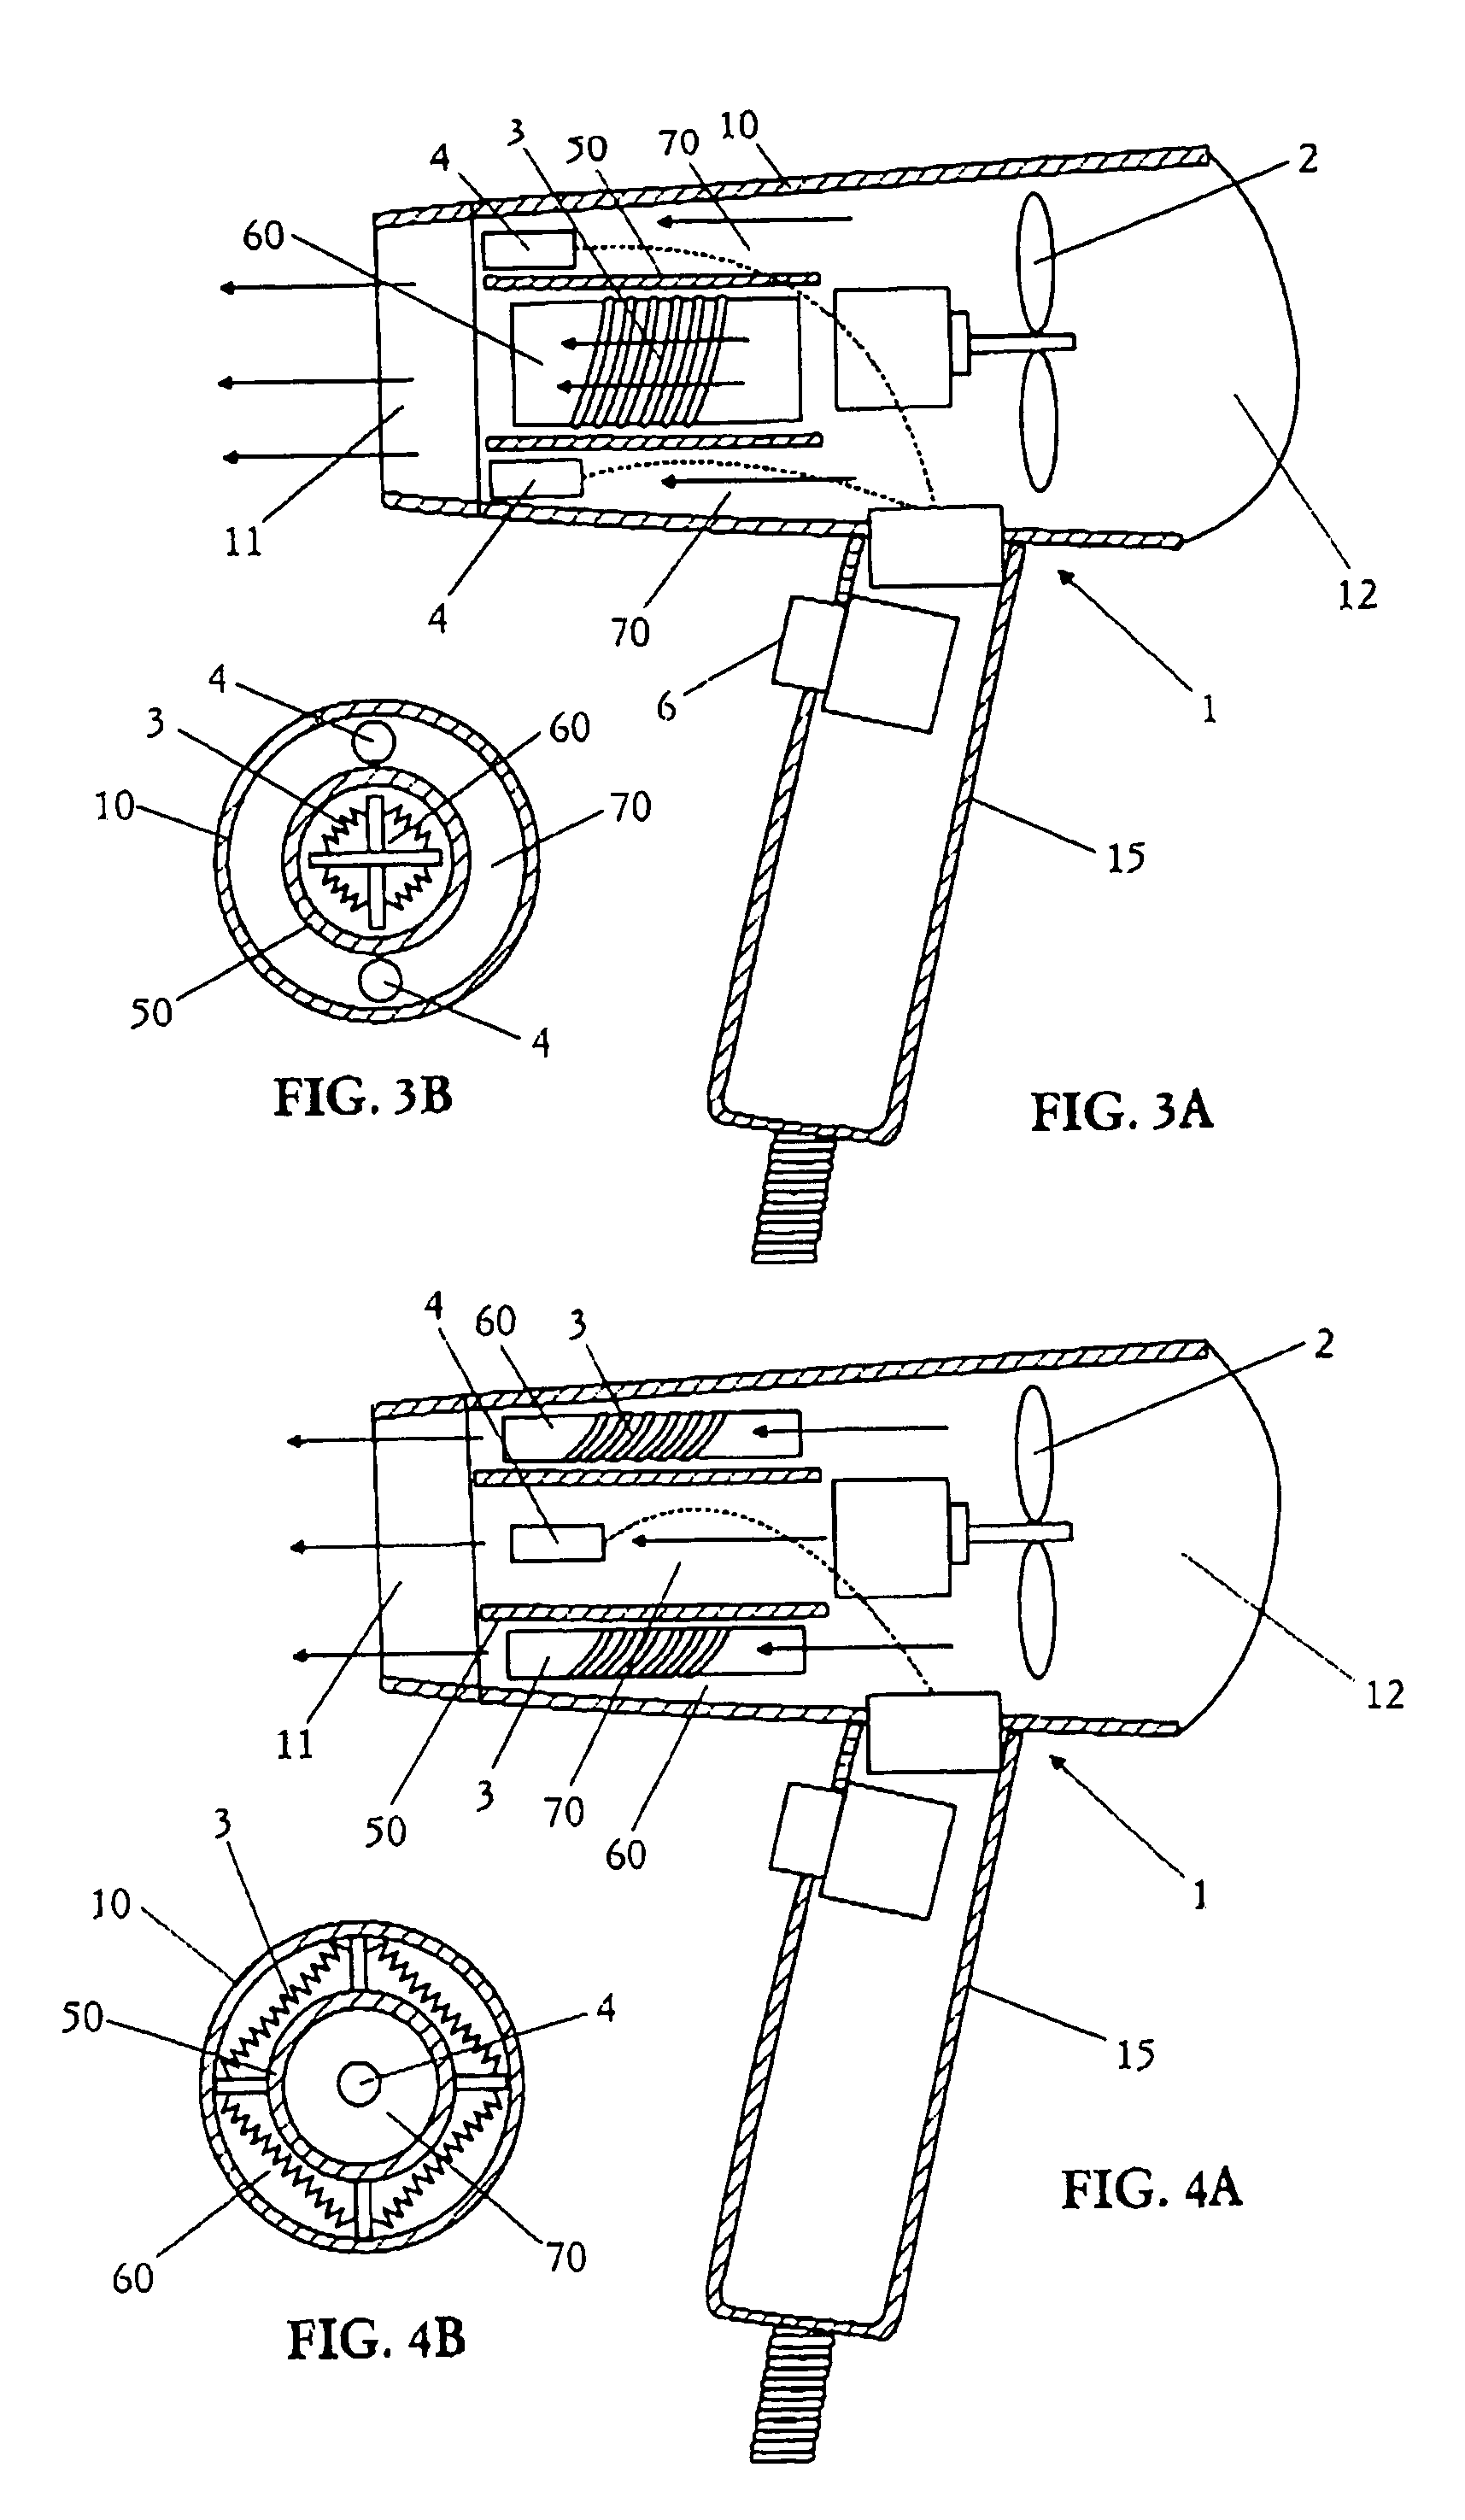 Hair dryer with minus ion generator